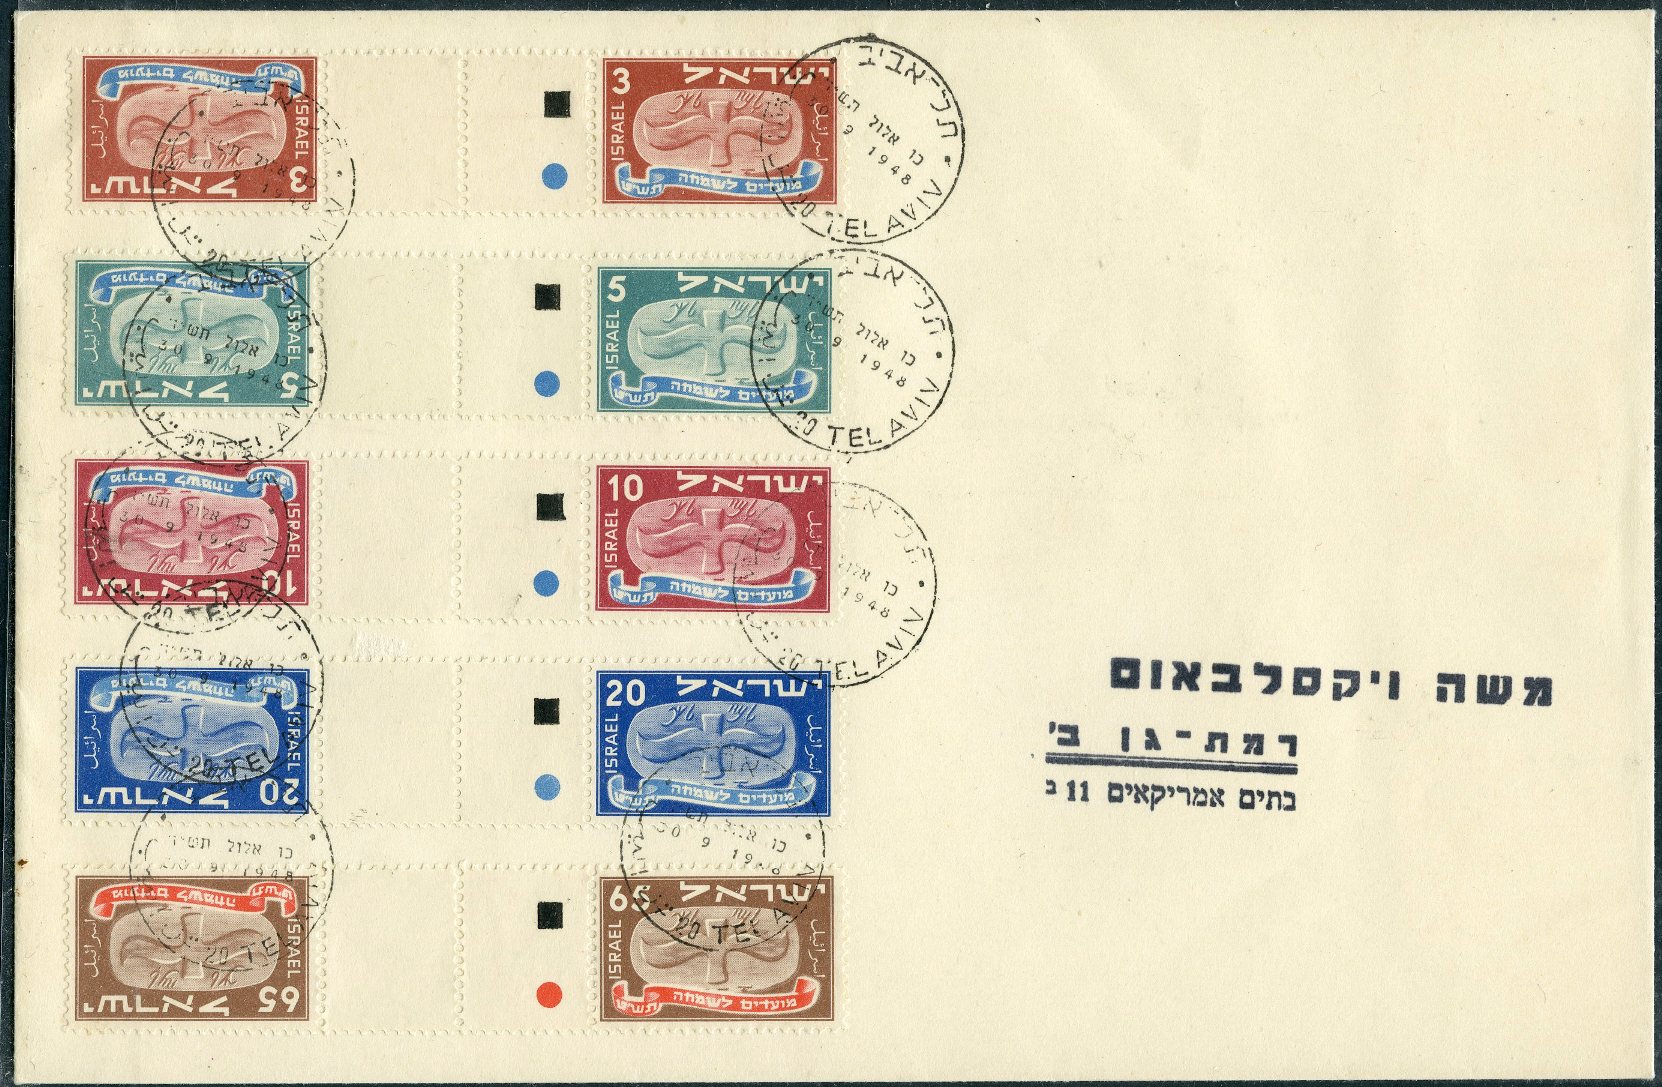 Lot 310 - ISRAEL: ISSUES, FDC's, PLATE BLOCKS & BOOKLETS  -  Tel Aviv Stamps Ltd. Auction #50